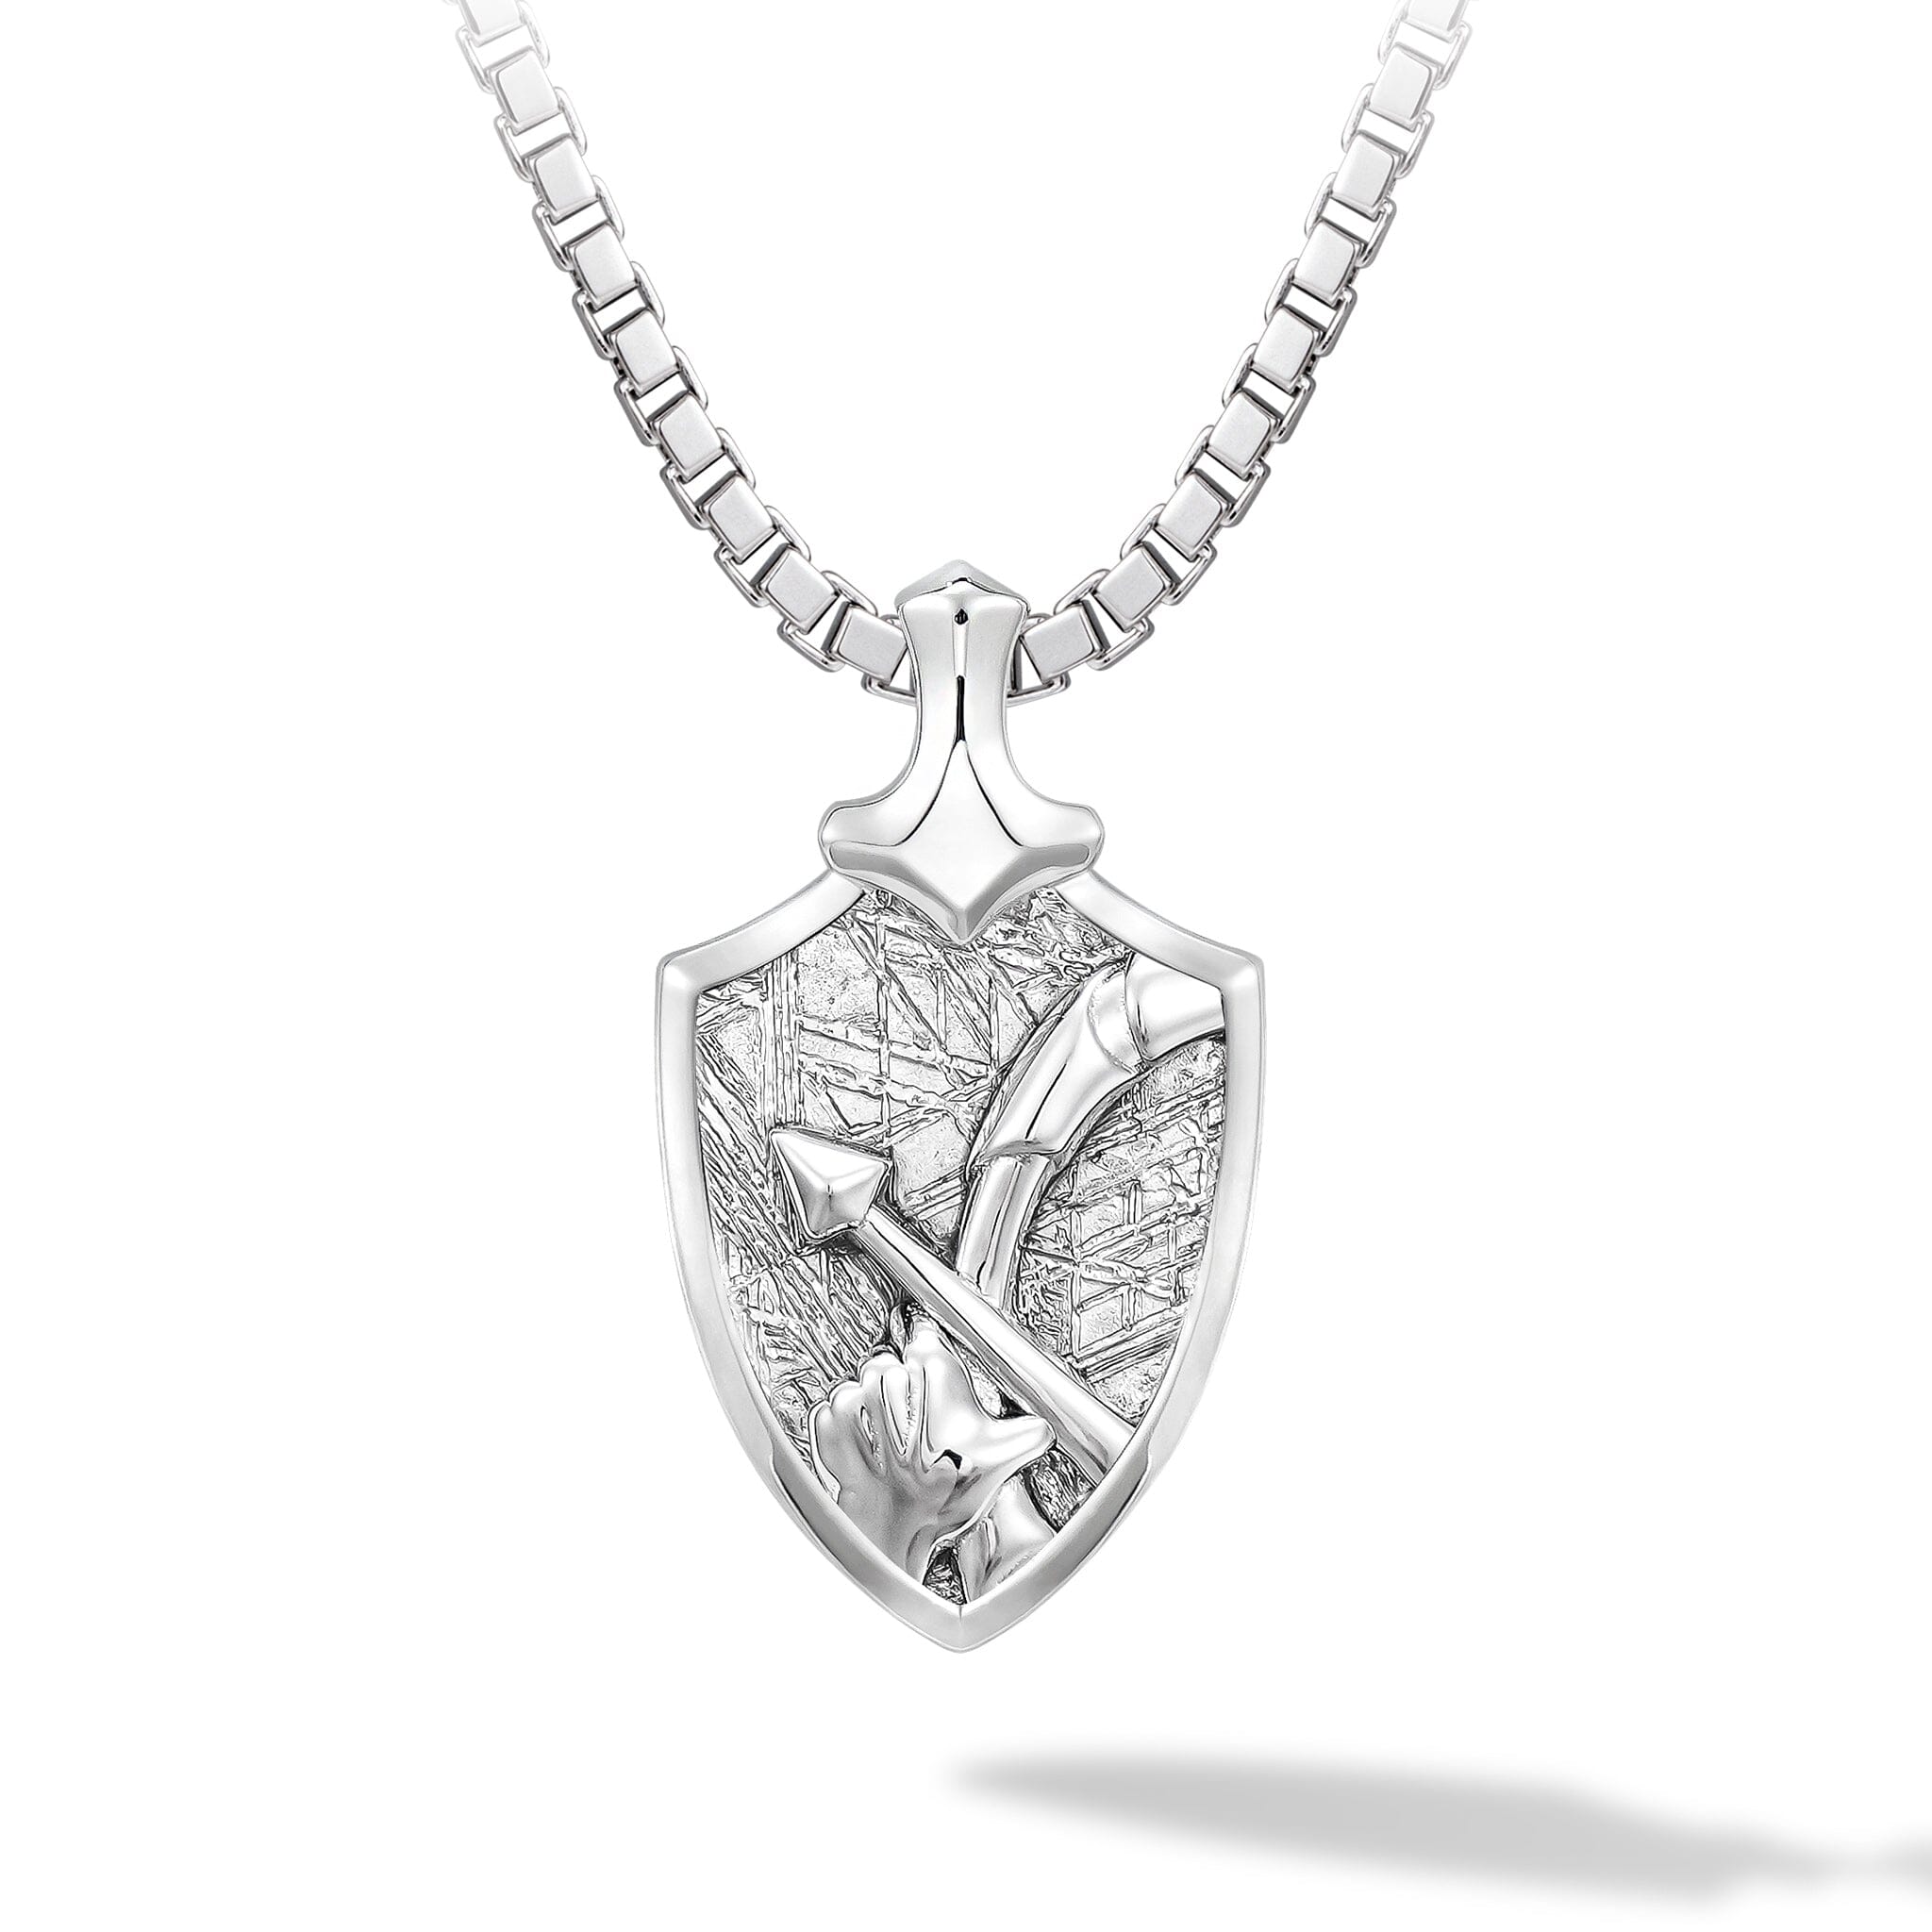 Buy Genuine Meteorite Necklace Pendant with Certificate of Authenticity  from Campo Del Cielo Fall at Amazon.in